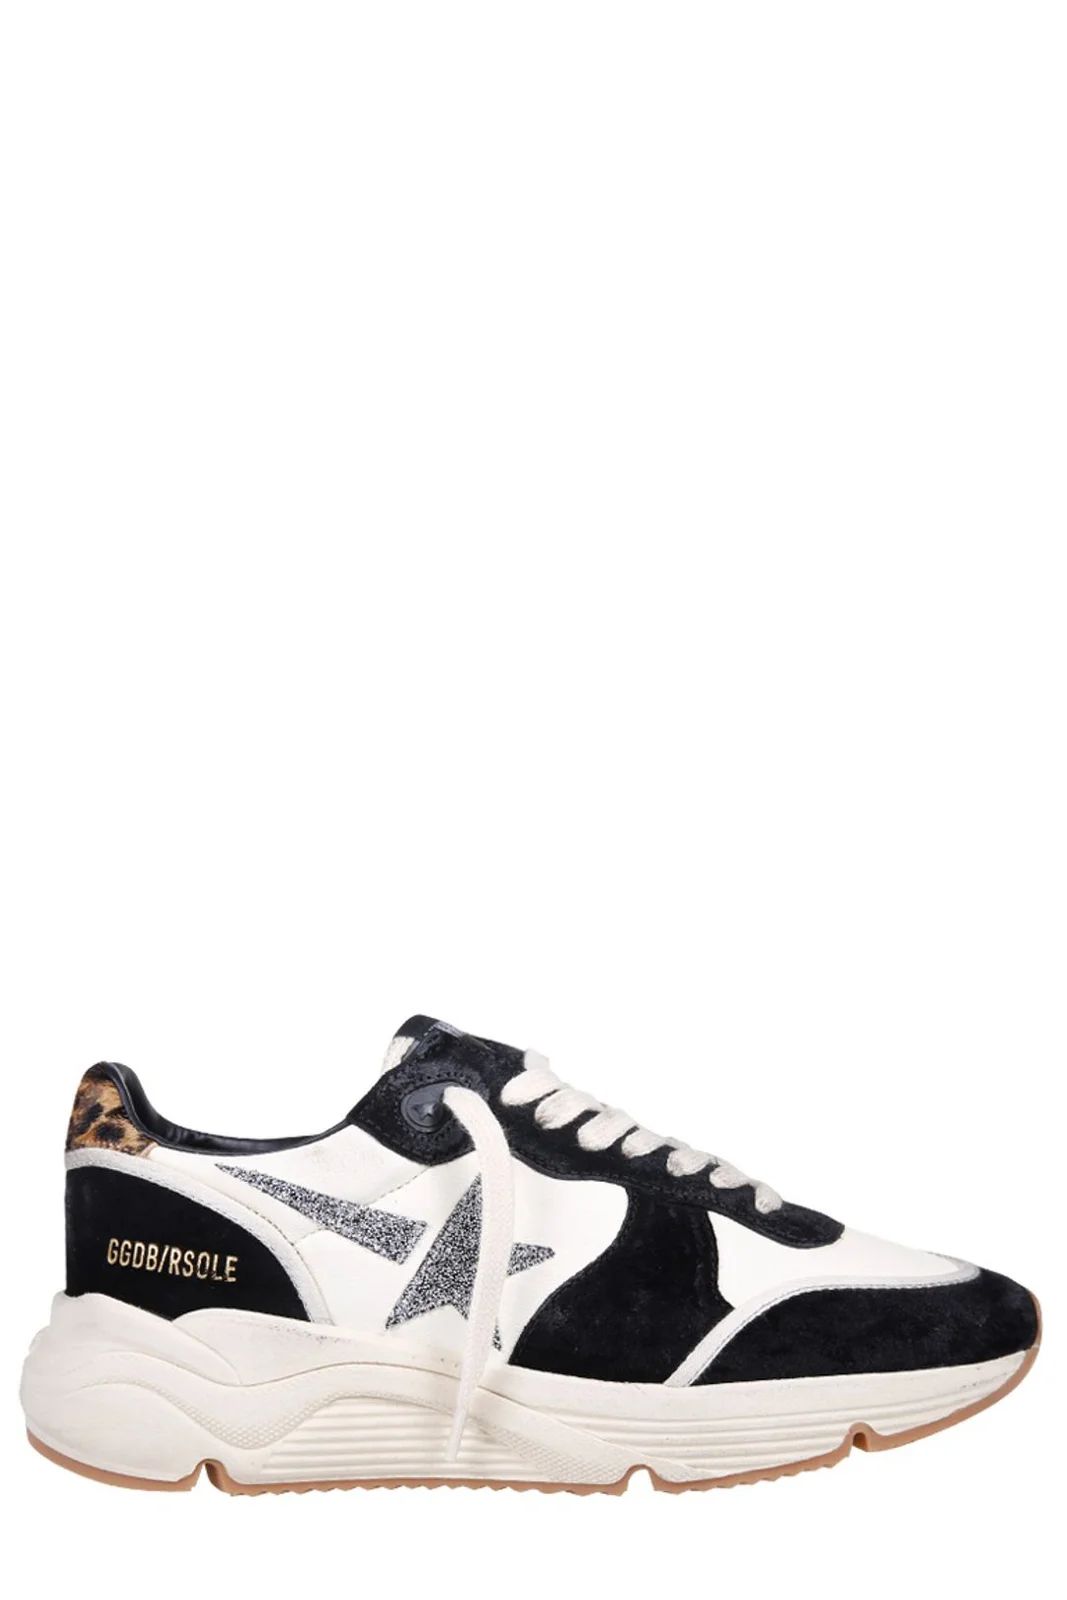 Golden Goose Deluxe Brand Running Sole Lace-Up Sneakers | Cettire Global